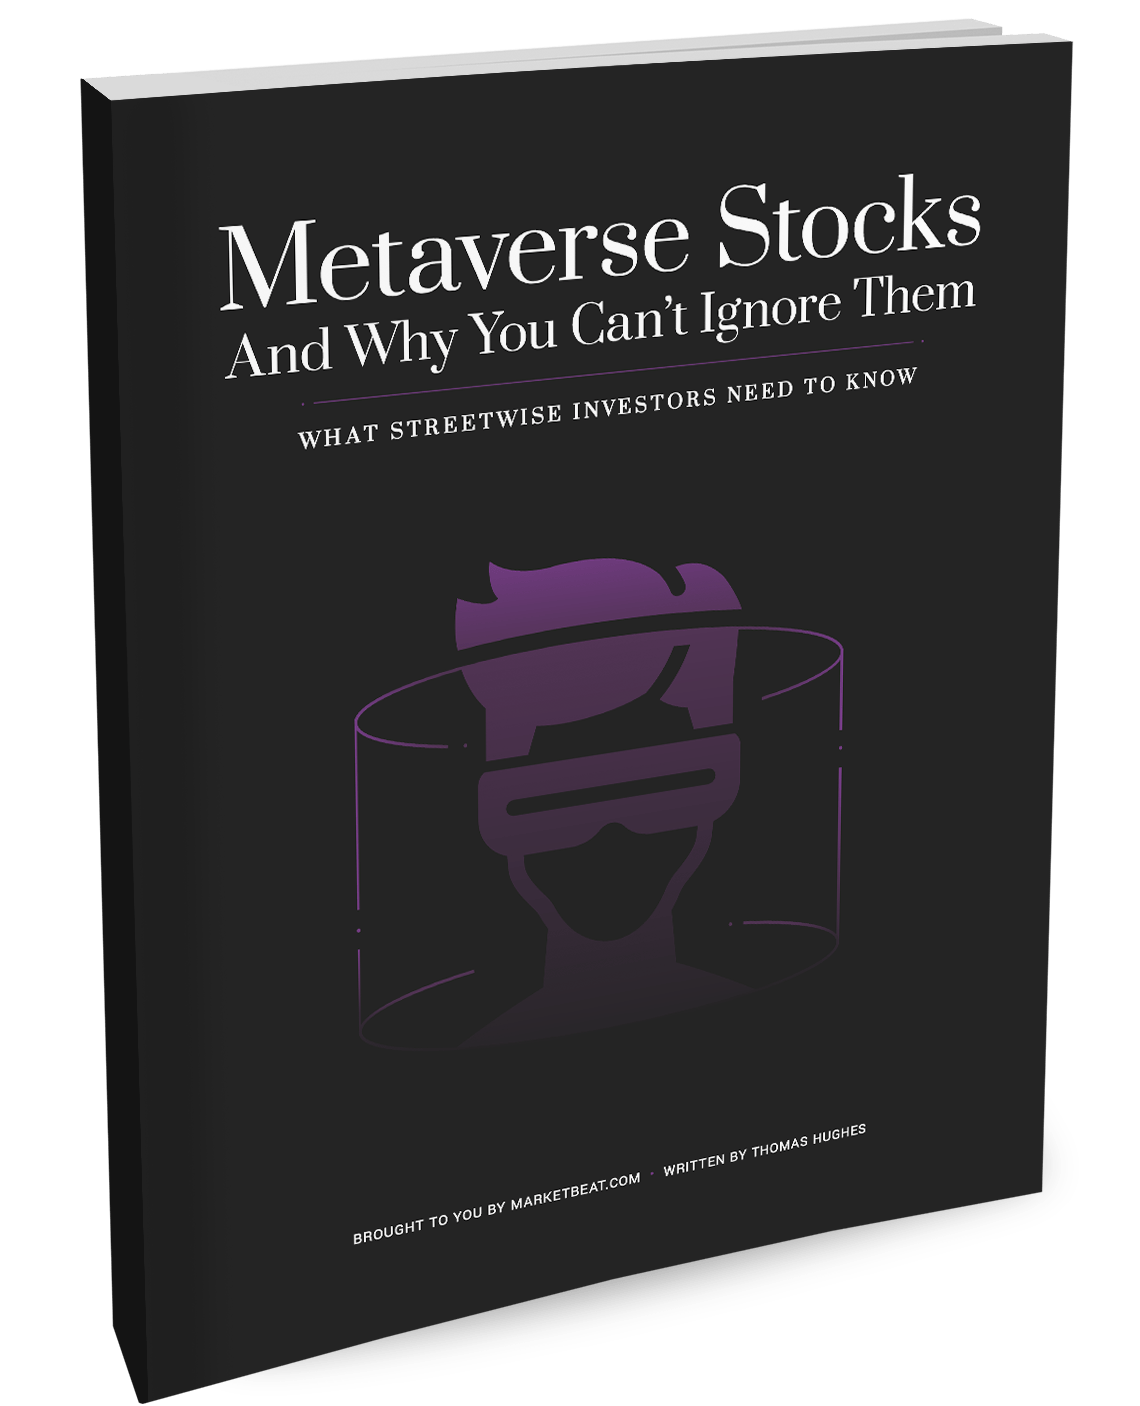 Metaverse covers stocks and why you can't ignore them